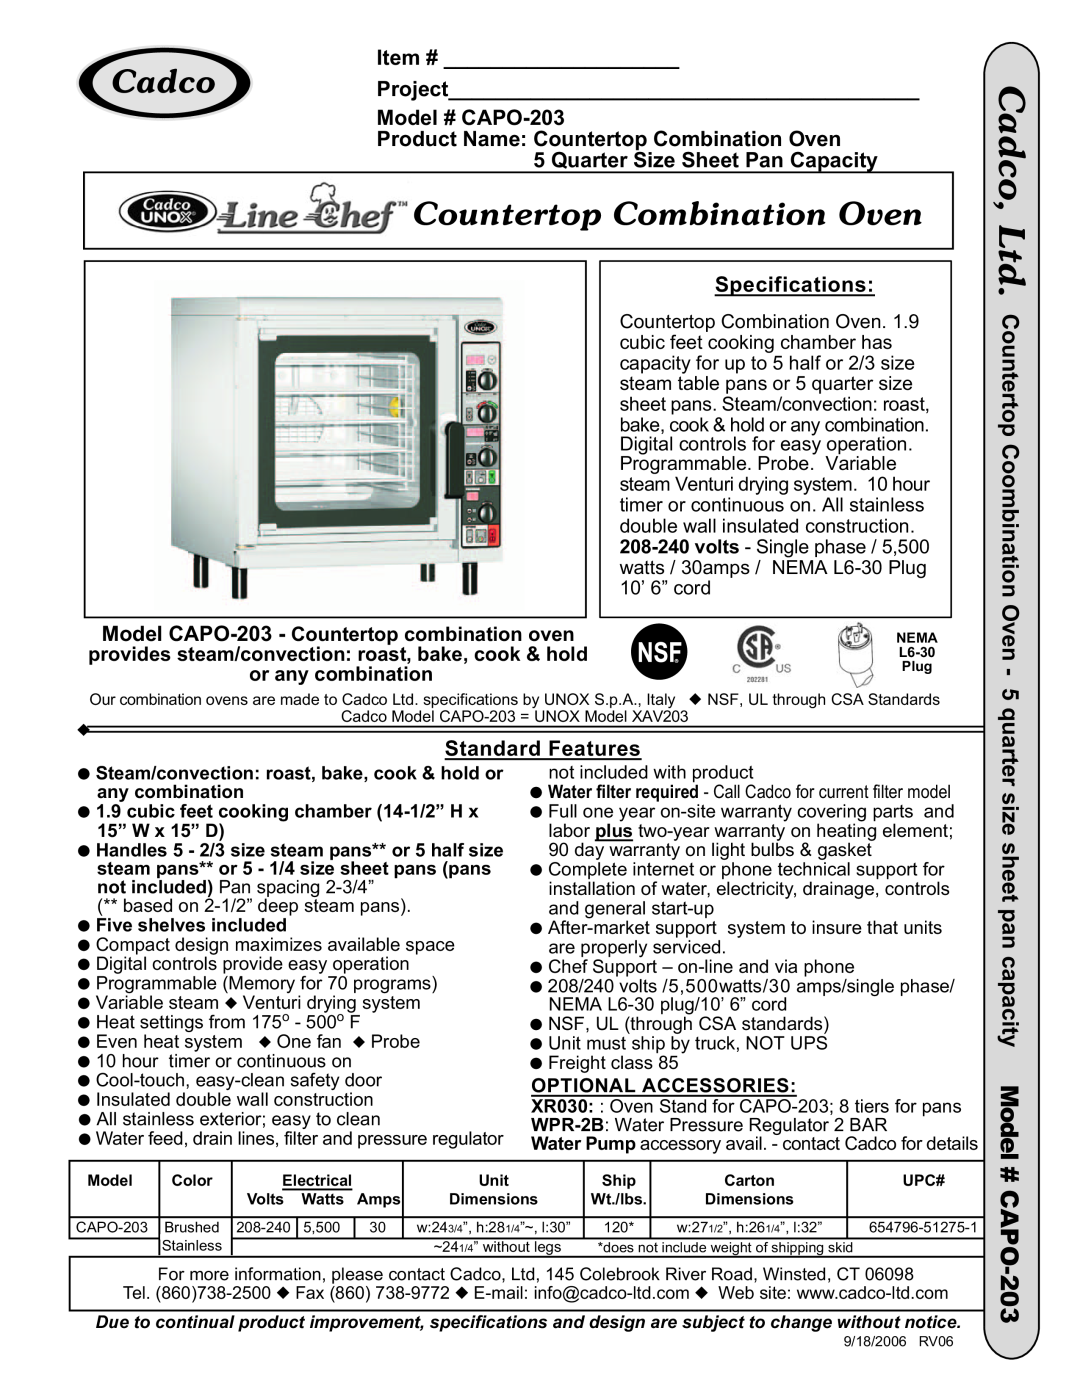 Cadco dimensions Item #, Project, Model # CAPO-203, Product Name Countertop Combination Oven, Specifications 